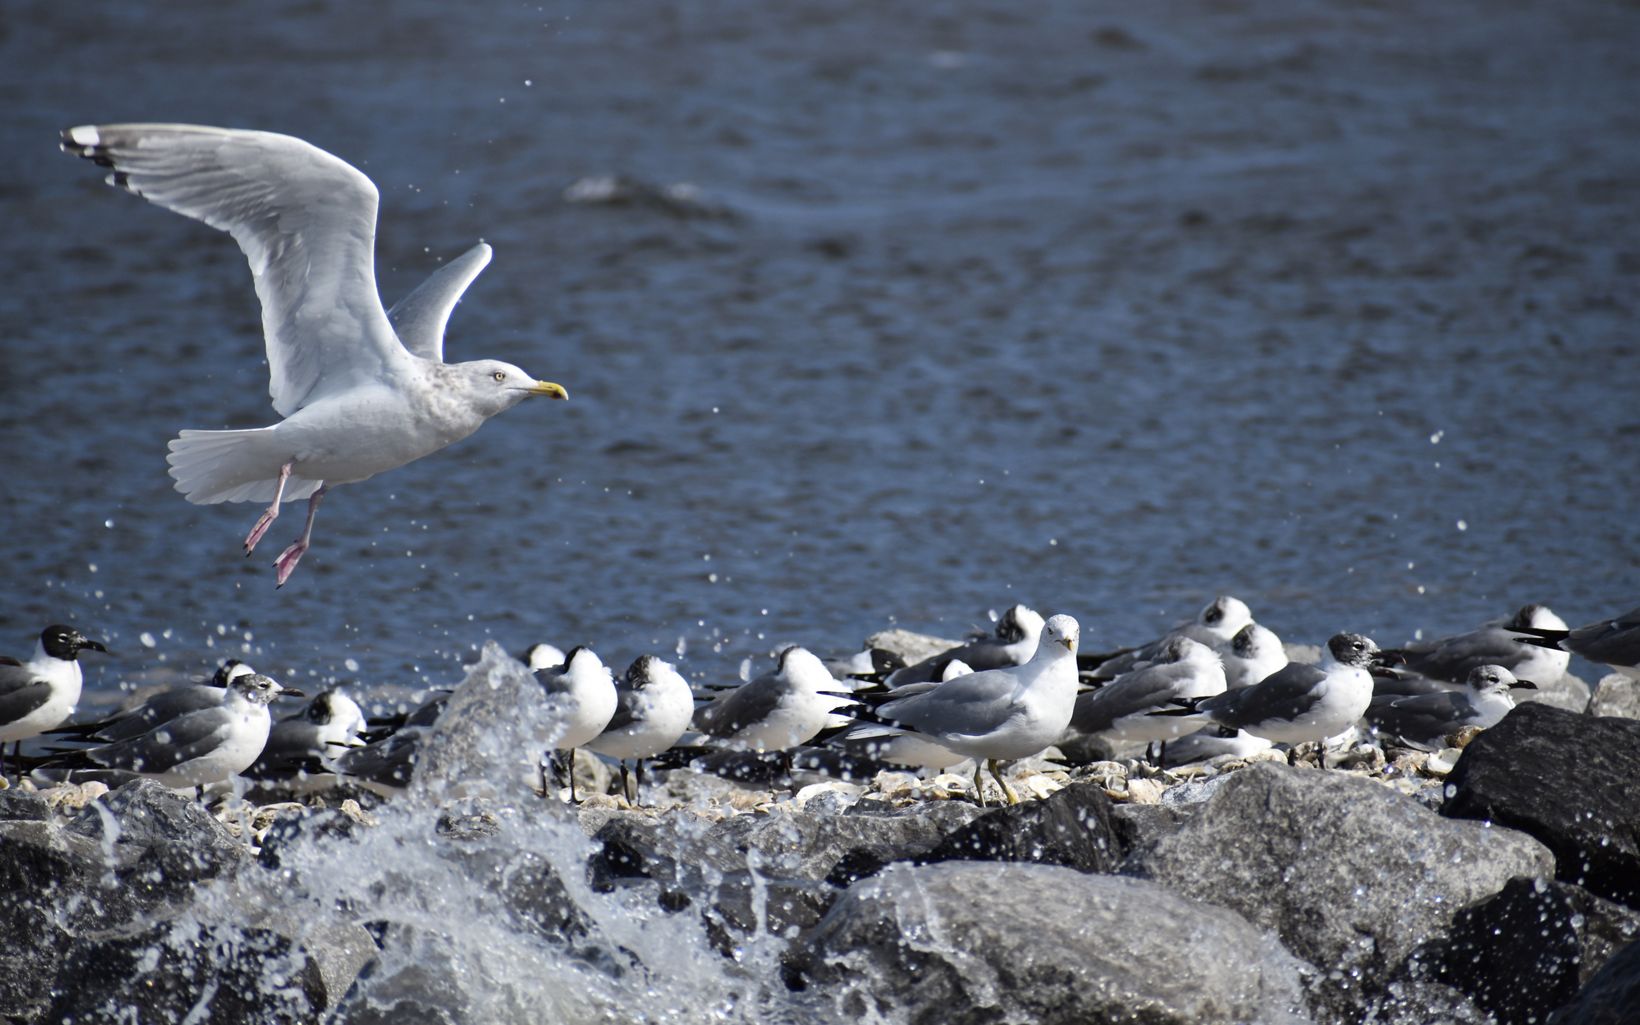 A sea gull lands on a newly-constructed oyster reef along with many sea gulls perched on the reef.